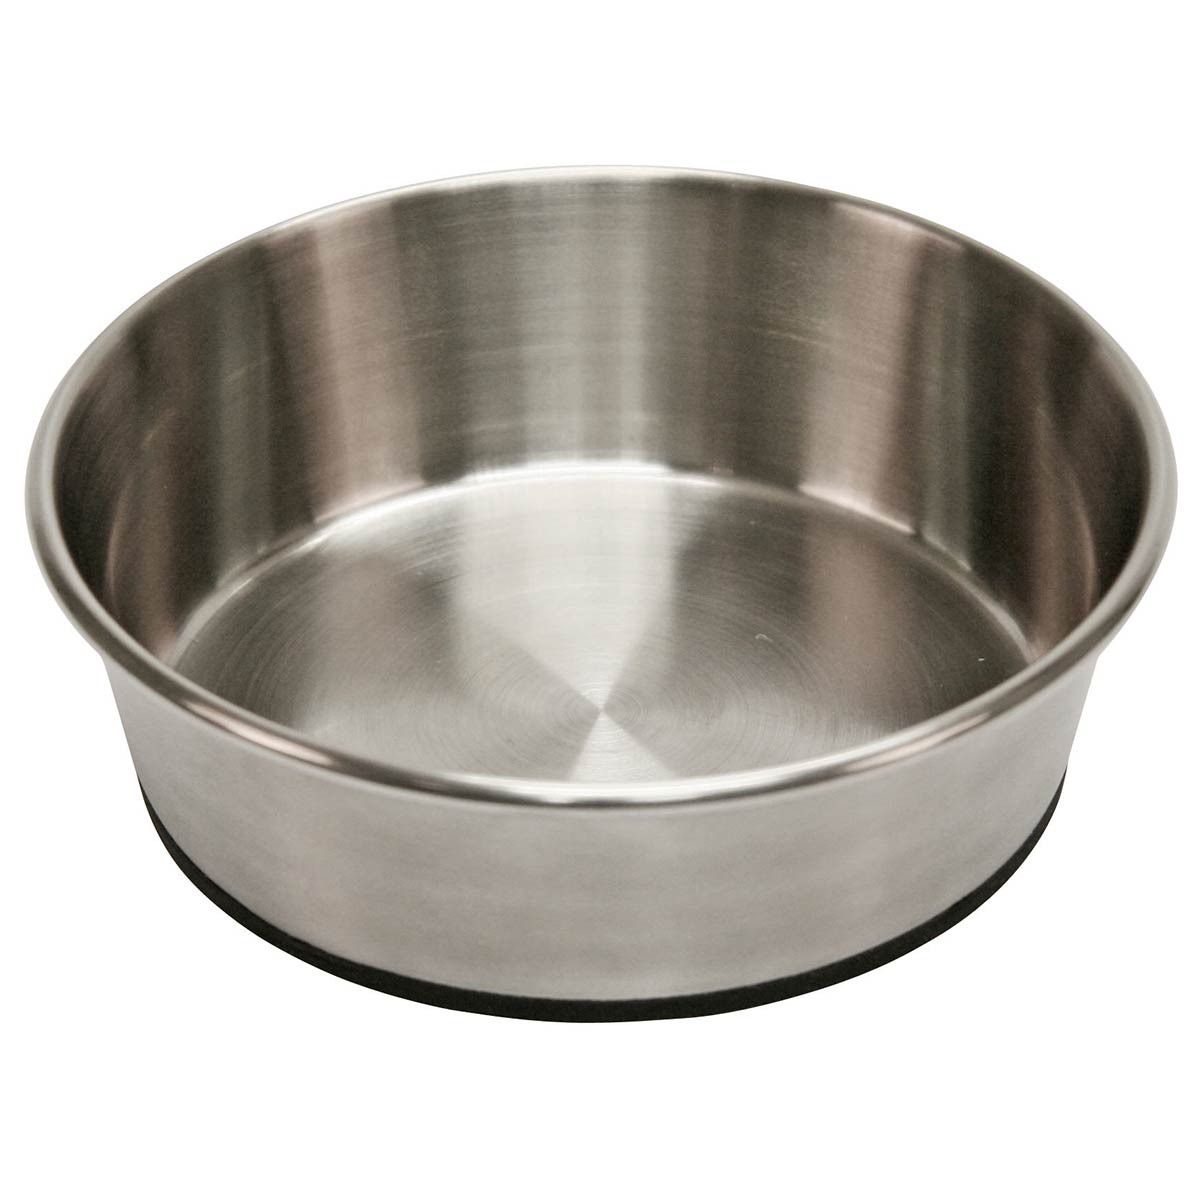 Stainless Steel Bowl 425 ml